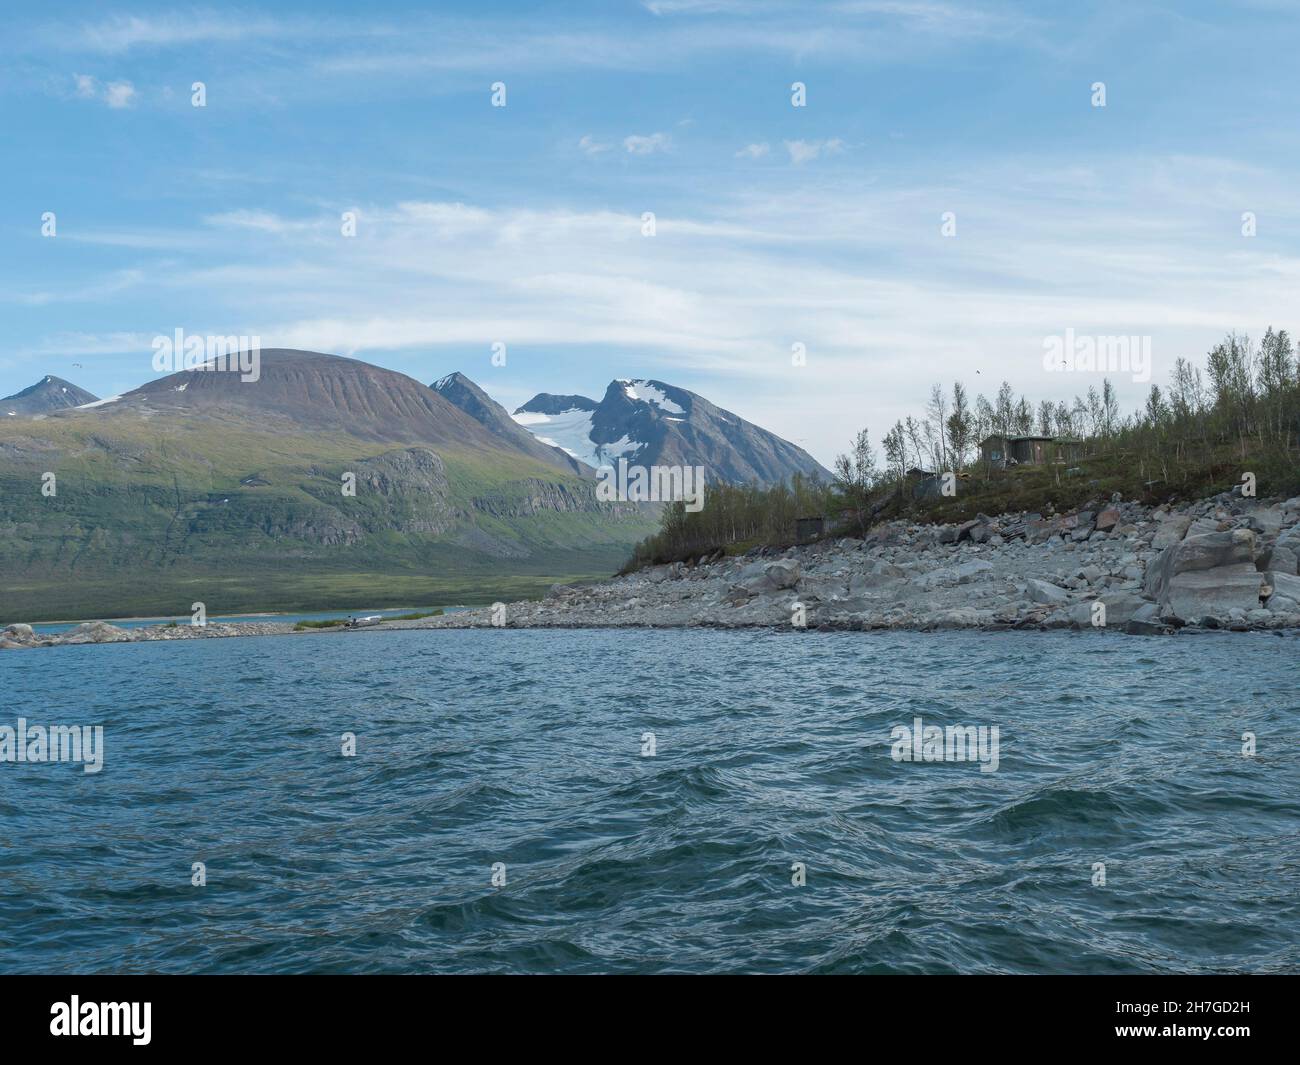 Summer view of over lake Akkajaure to Akka, Ahkka mountain massif with snow and glacier and Anonjalmme saami setllement. Start point of Stock Photo